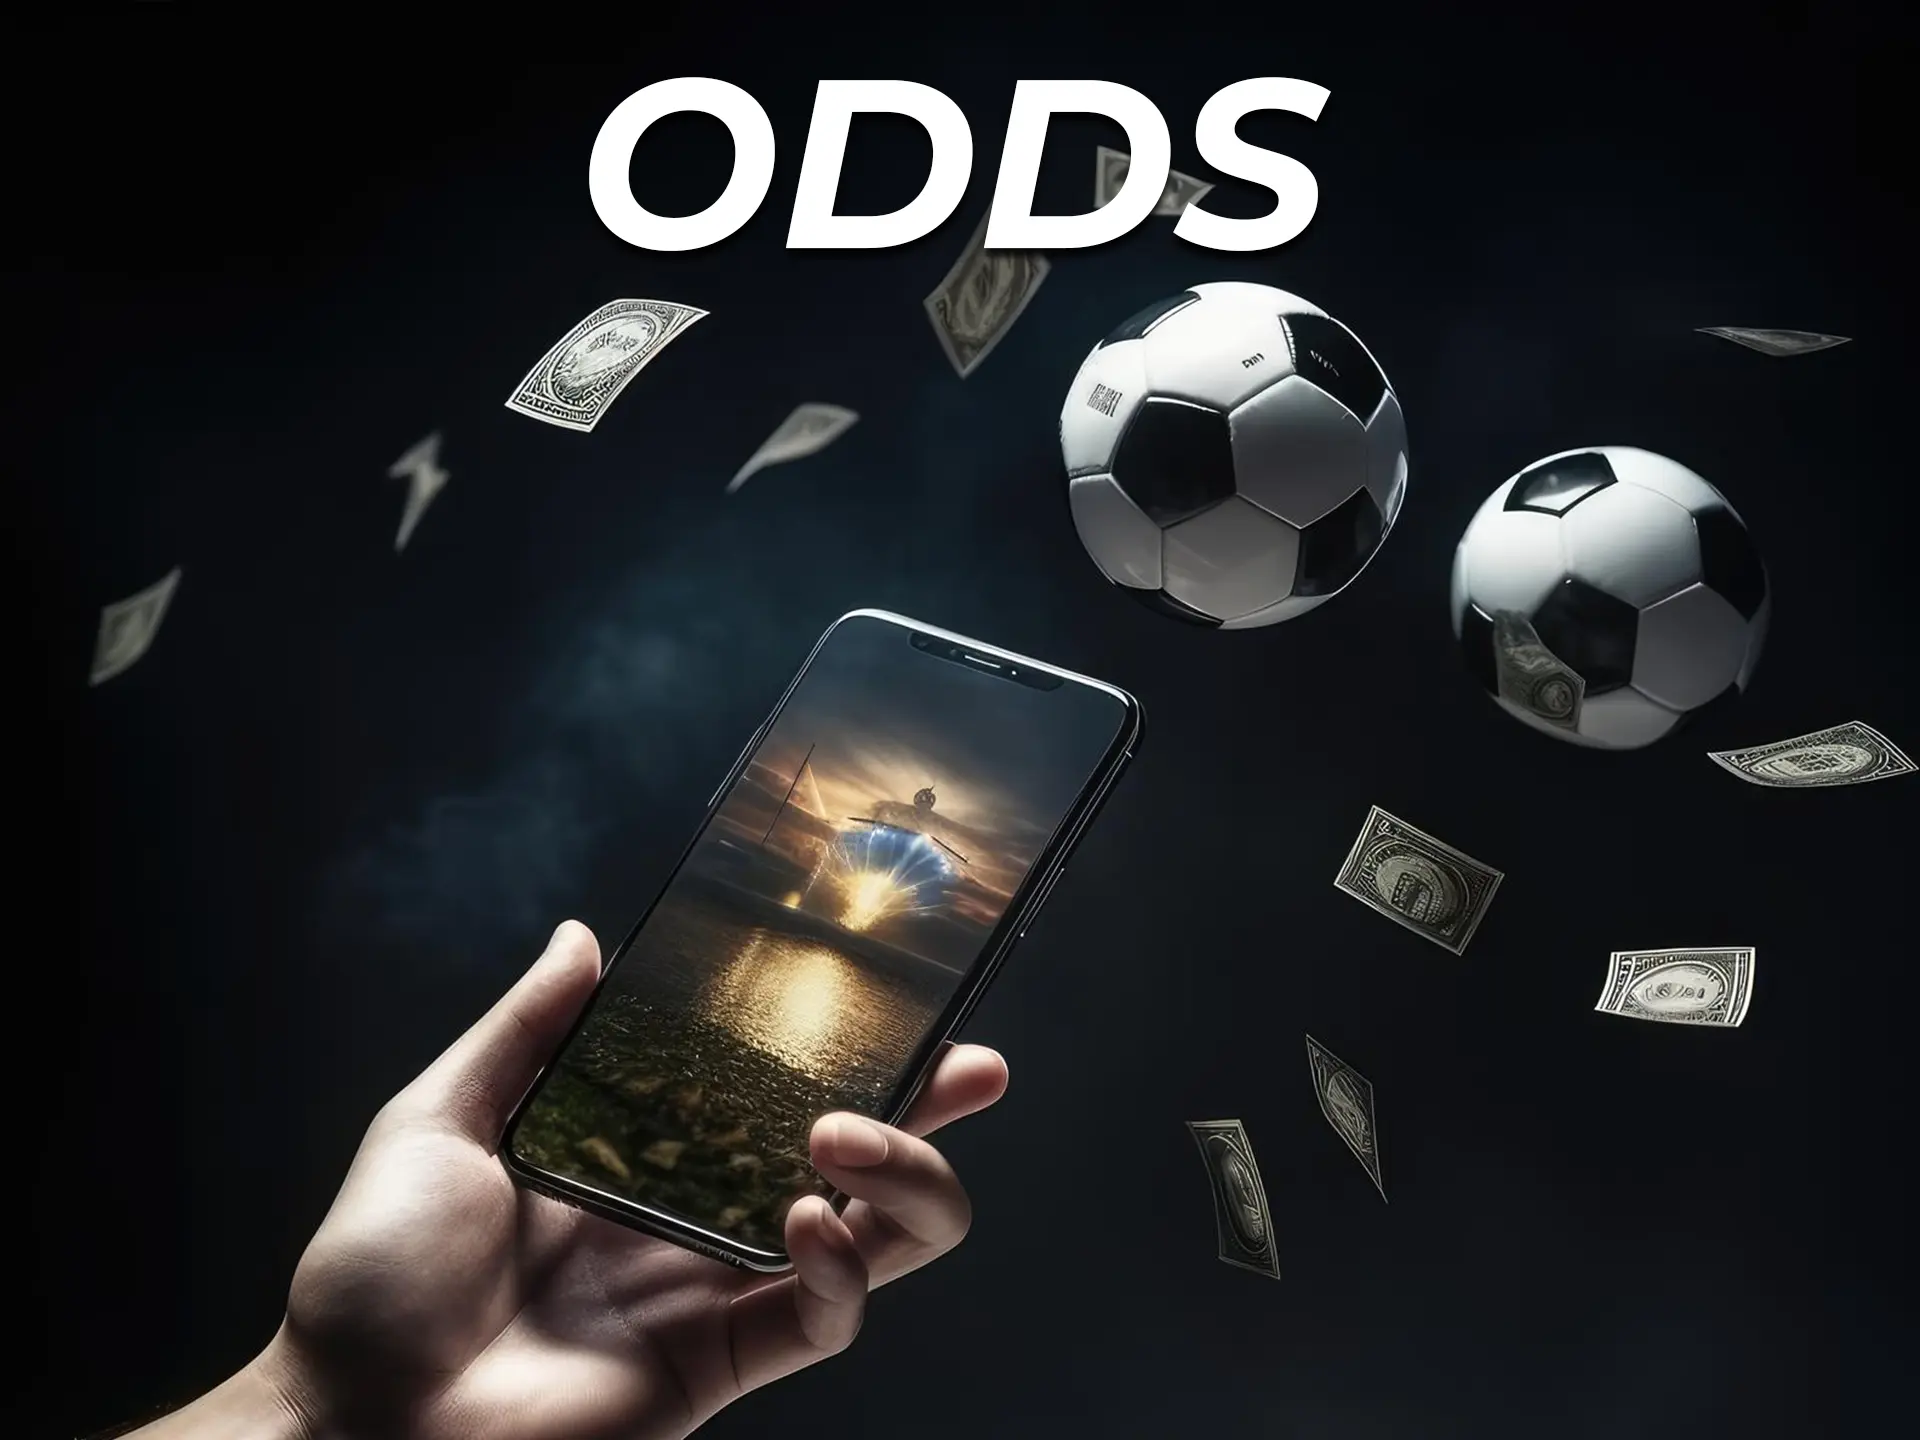 Research the odds on several sites before placing a bet.